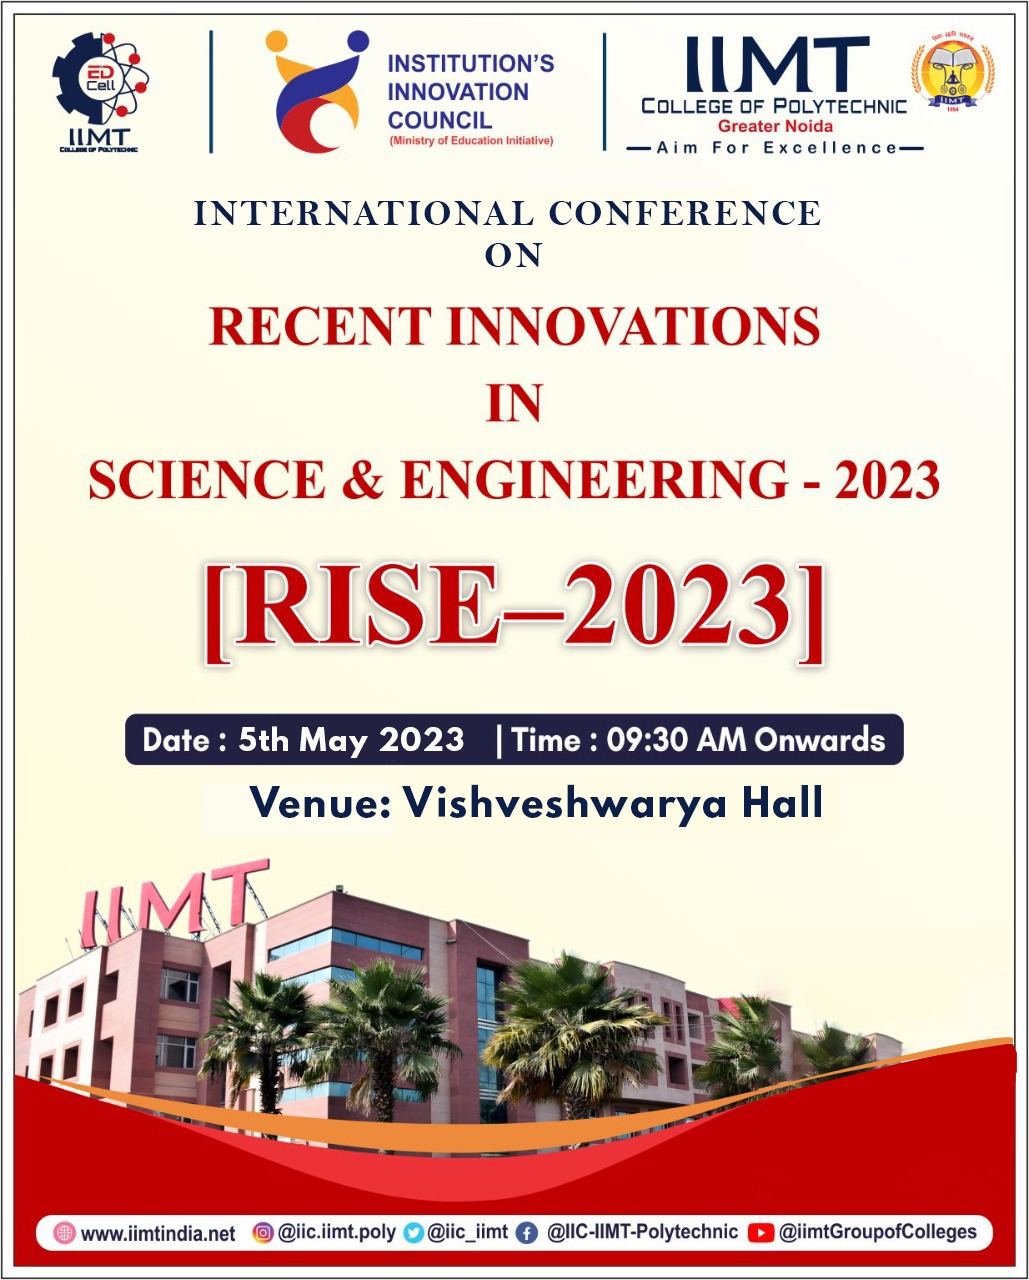 International Conference On Recent Innovations In Science & Engineering - 2023